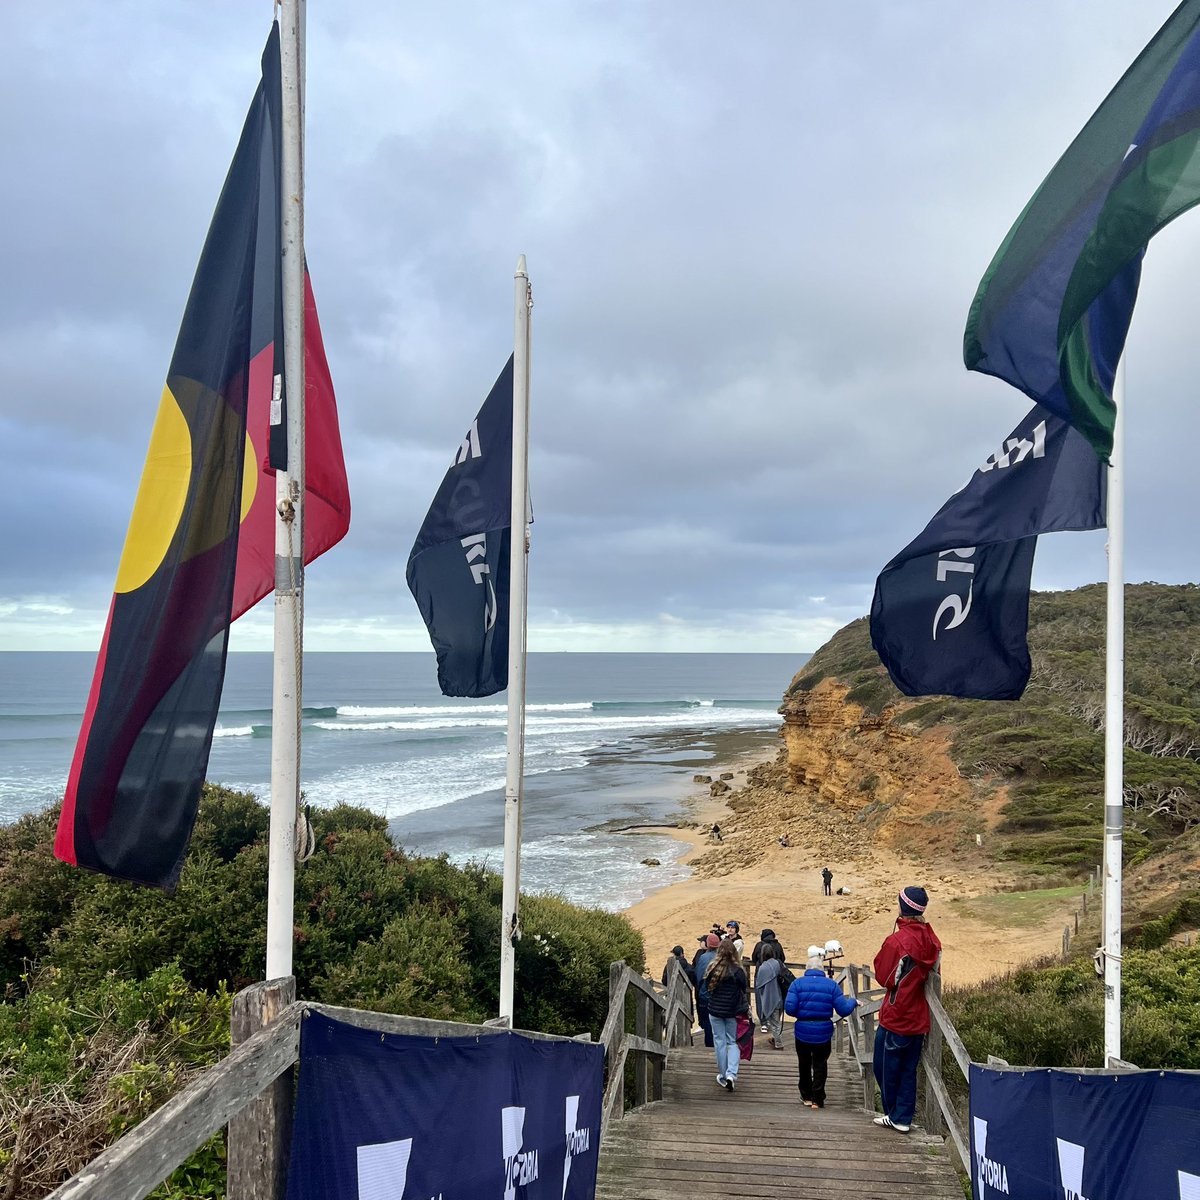 We kicked off today’s visit to the Surf Coast with a beautiful Welcome to Country on Wadawurrung Country for the 11th Australian Indigenous Surfing Titles. @VicHealth is proud to support @SurfingVictoria and this important event — all about community, culture, connection.